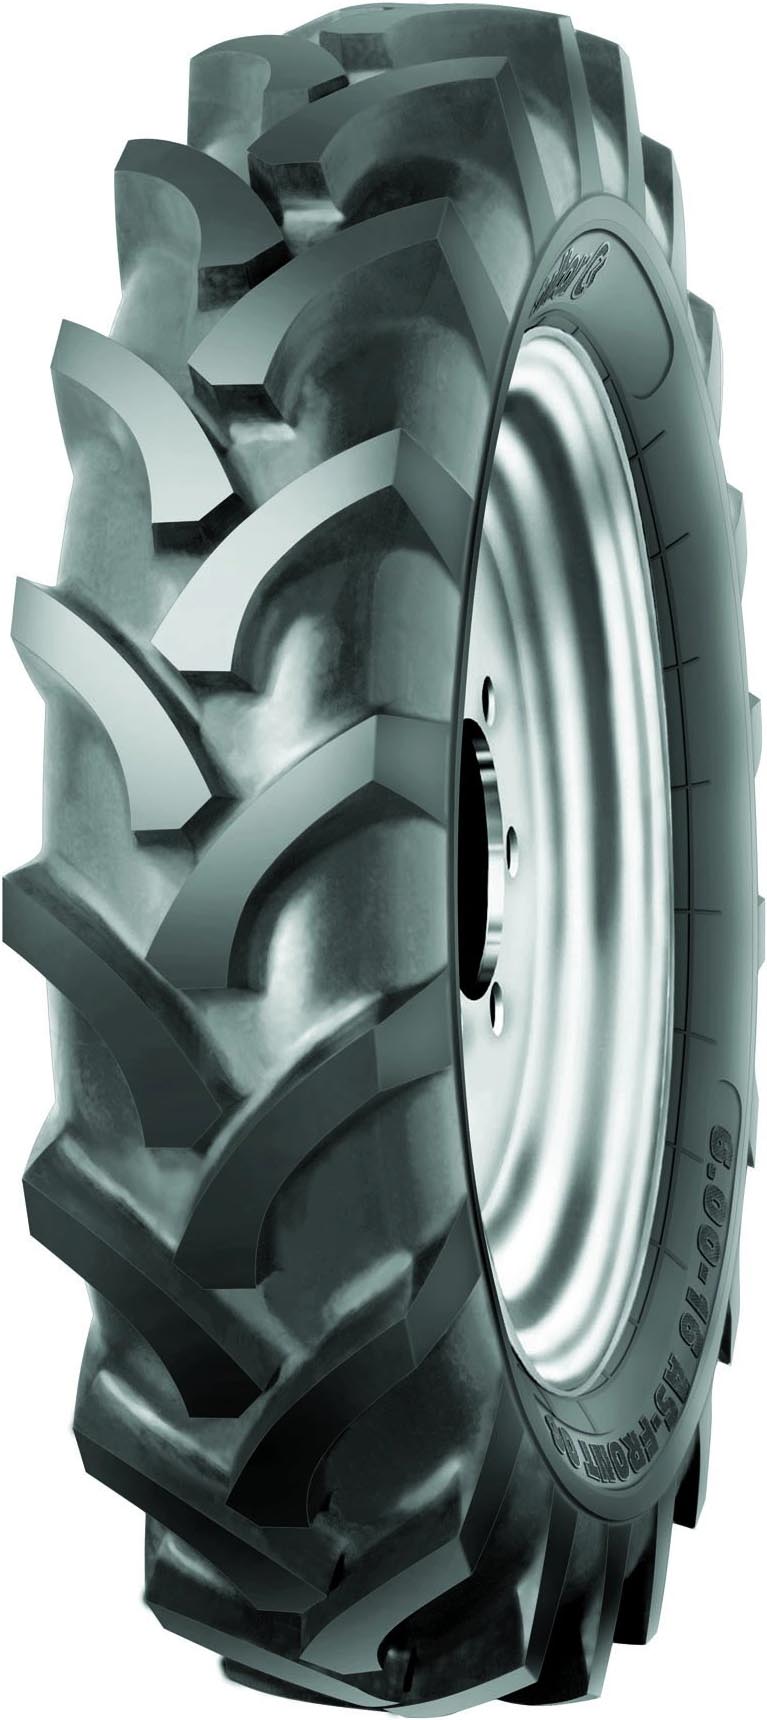 product_type-industrial_tires CULTOR AS-Front 06 8PR TT 6 R16 P